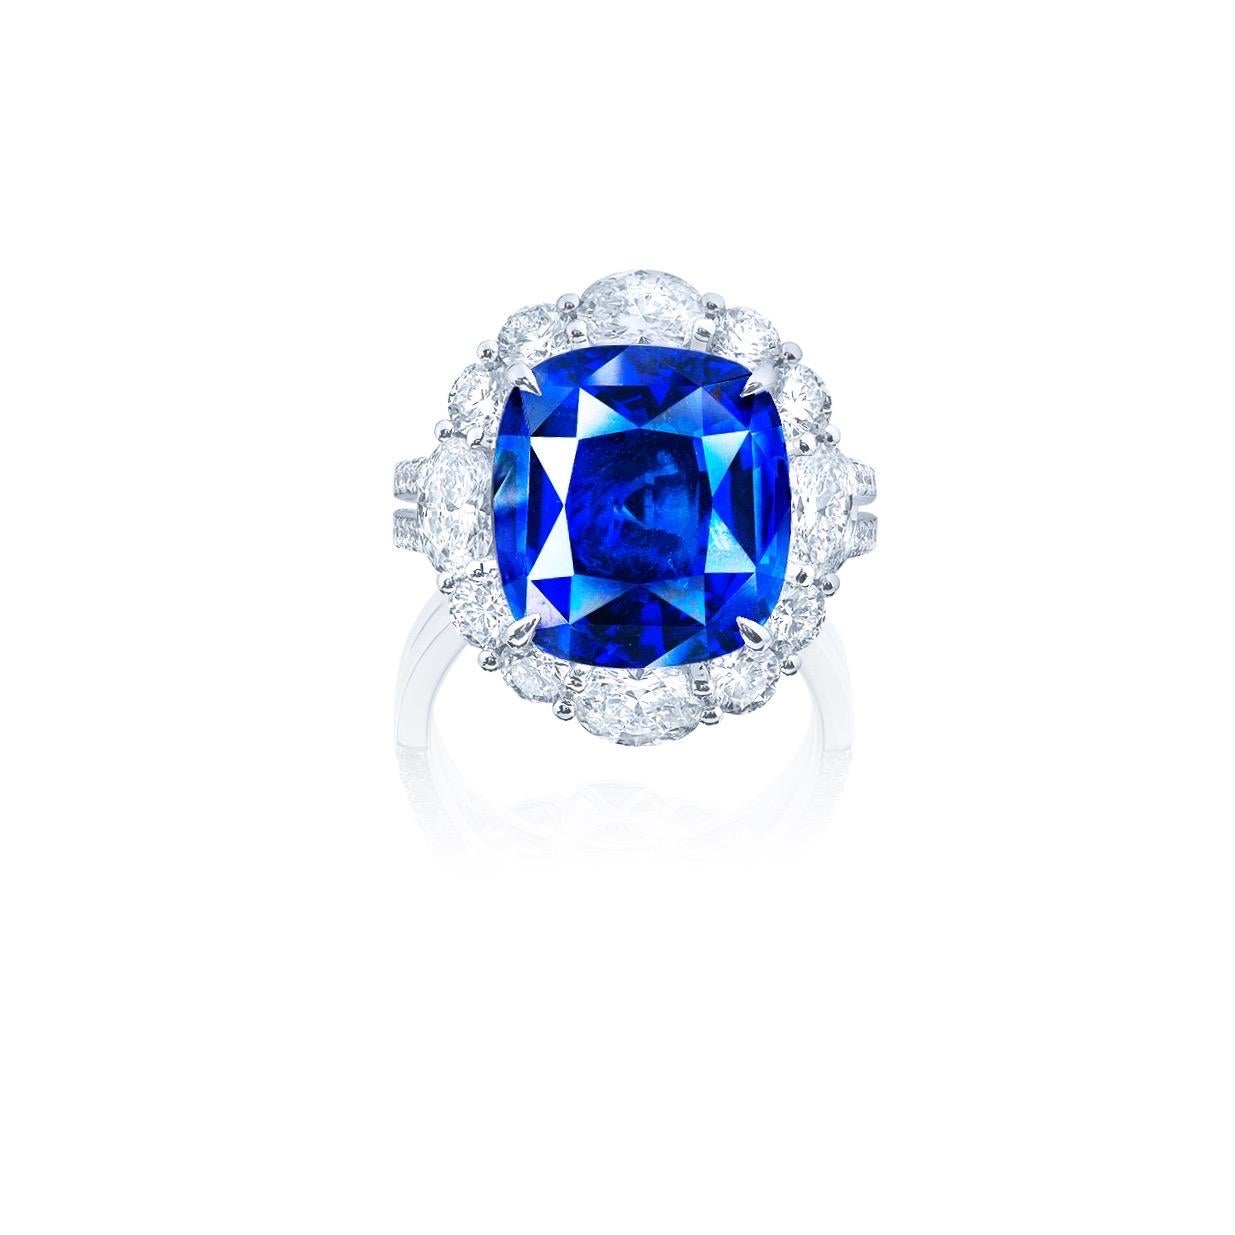 Main stone: Just over 6 carat “Cornflower Blue” certified No Heat sapphire of superb clarity. The most desirable beautiful color. 

Ceylon, or Sri Lanka, is located in the southeast of India and has been known as the 